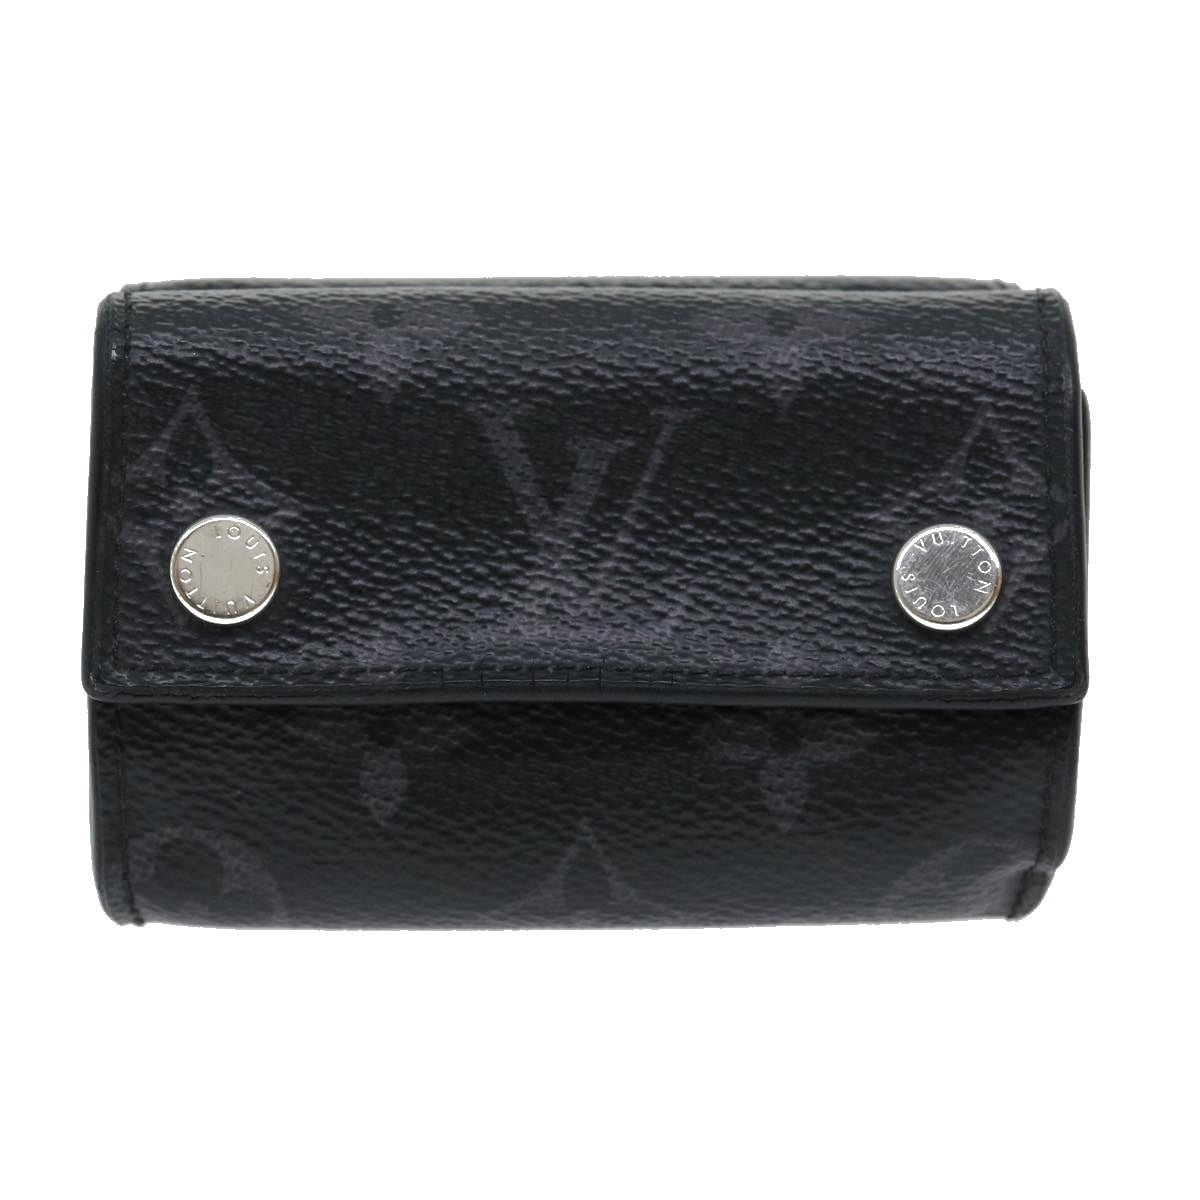 LOUISVUITTON Monogram Eclipse Reverse DiscoveryCompact Wallet M45417 Auth 30594